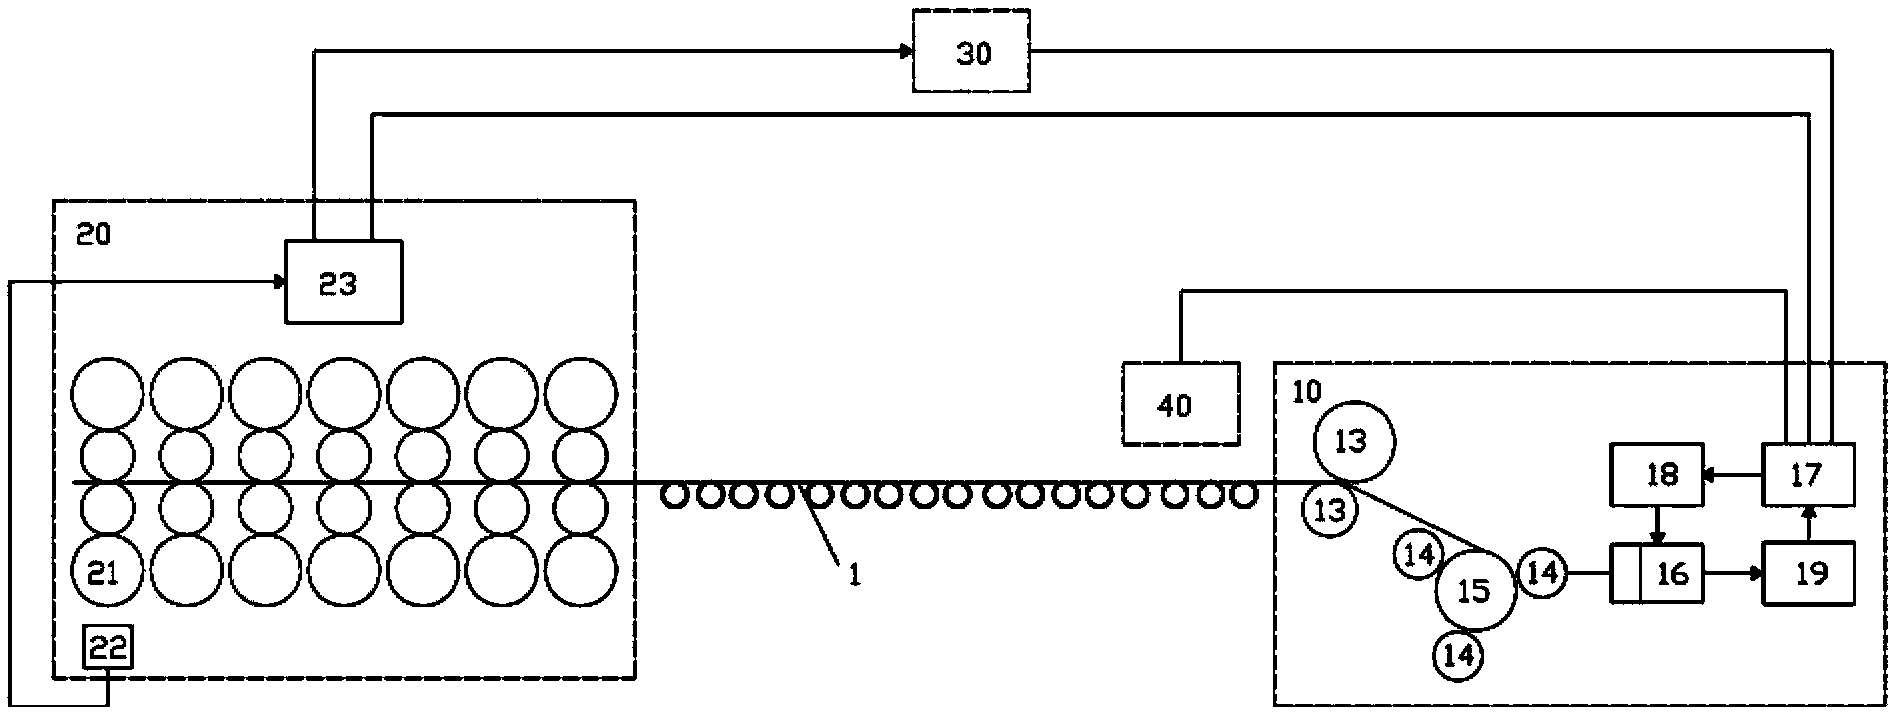 Roll gap setting method of wrapper roller in recoiling machine